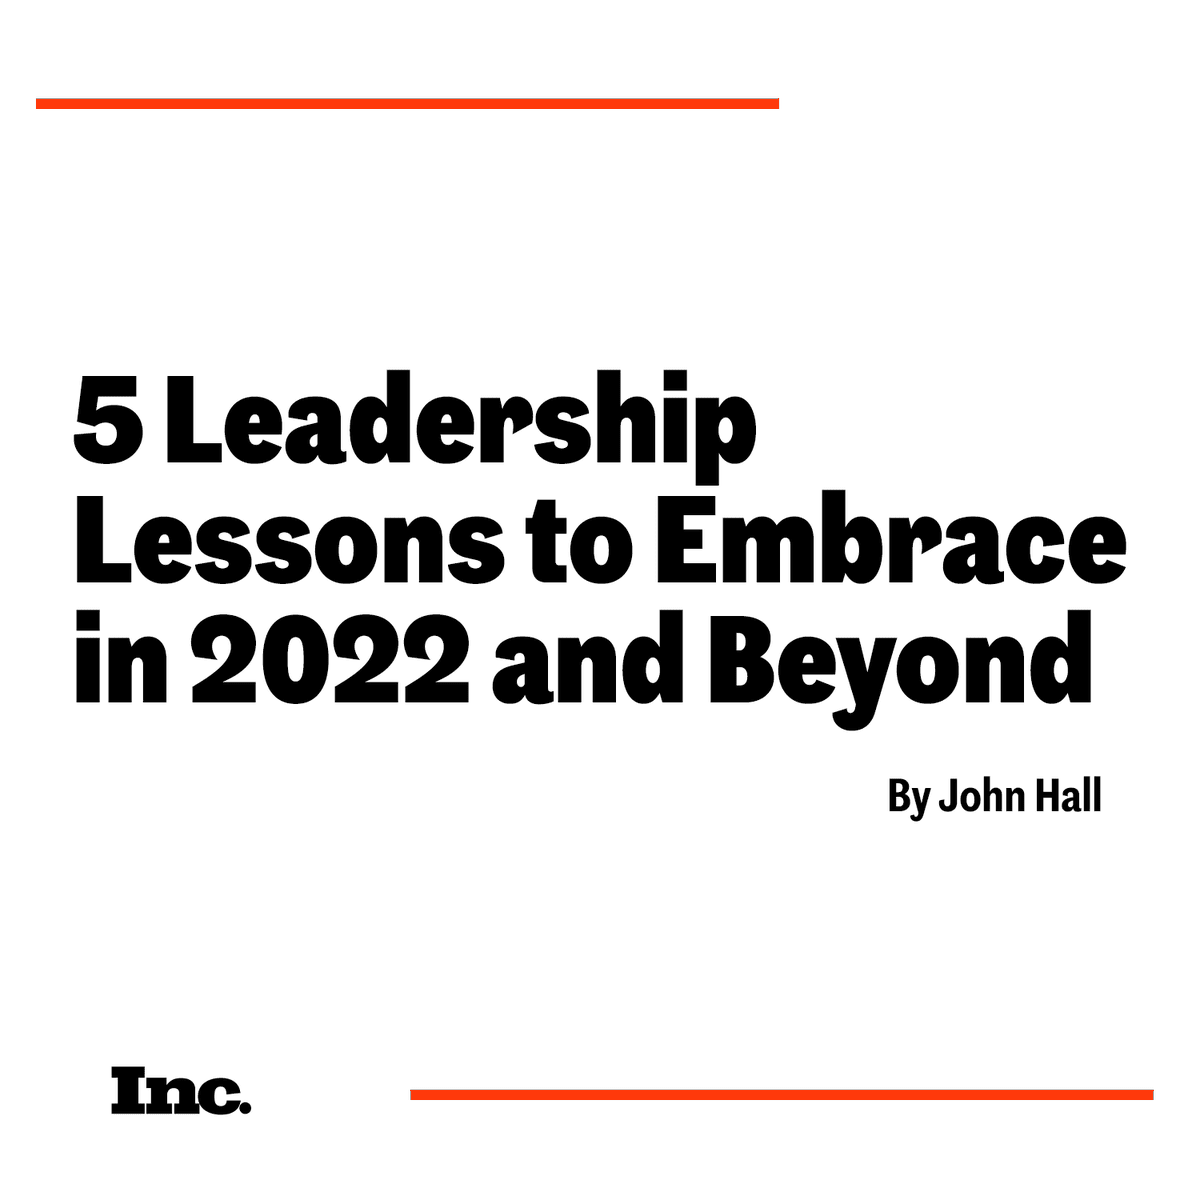 Leaders should understand that employees need space and opportunities to grow.